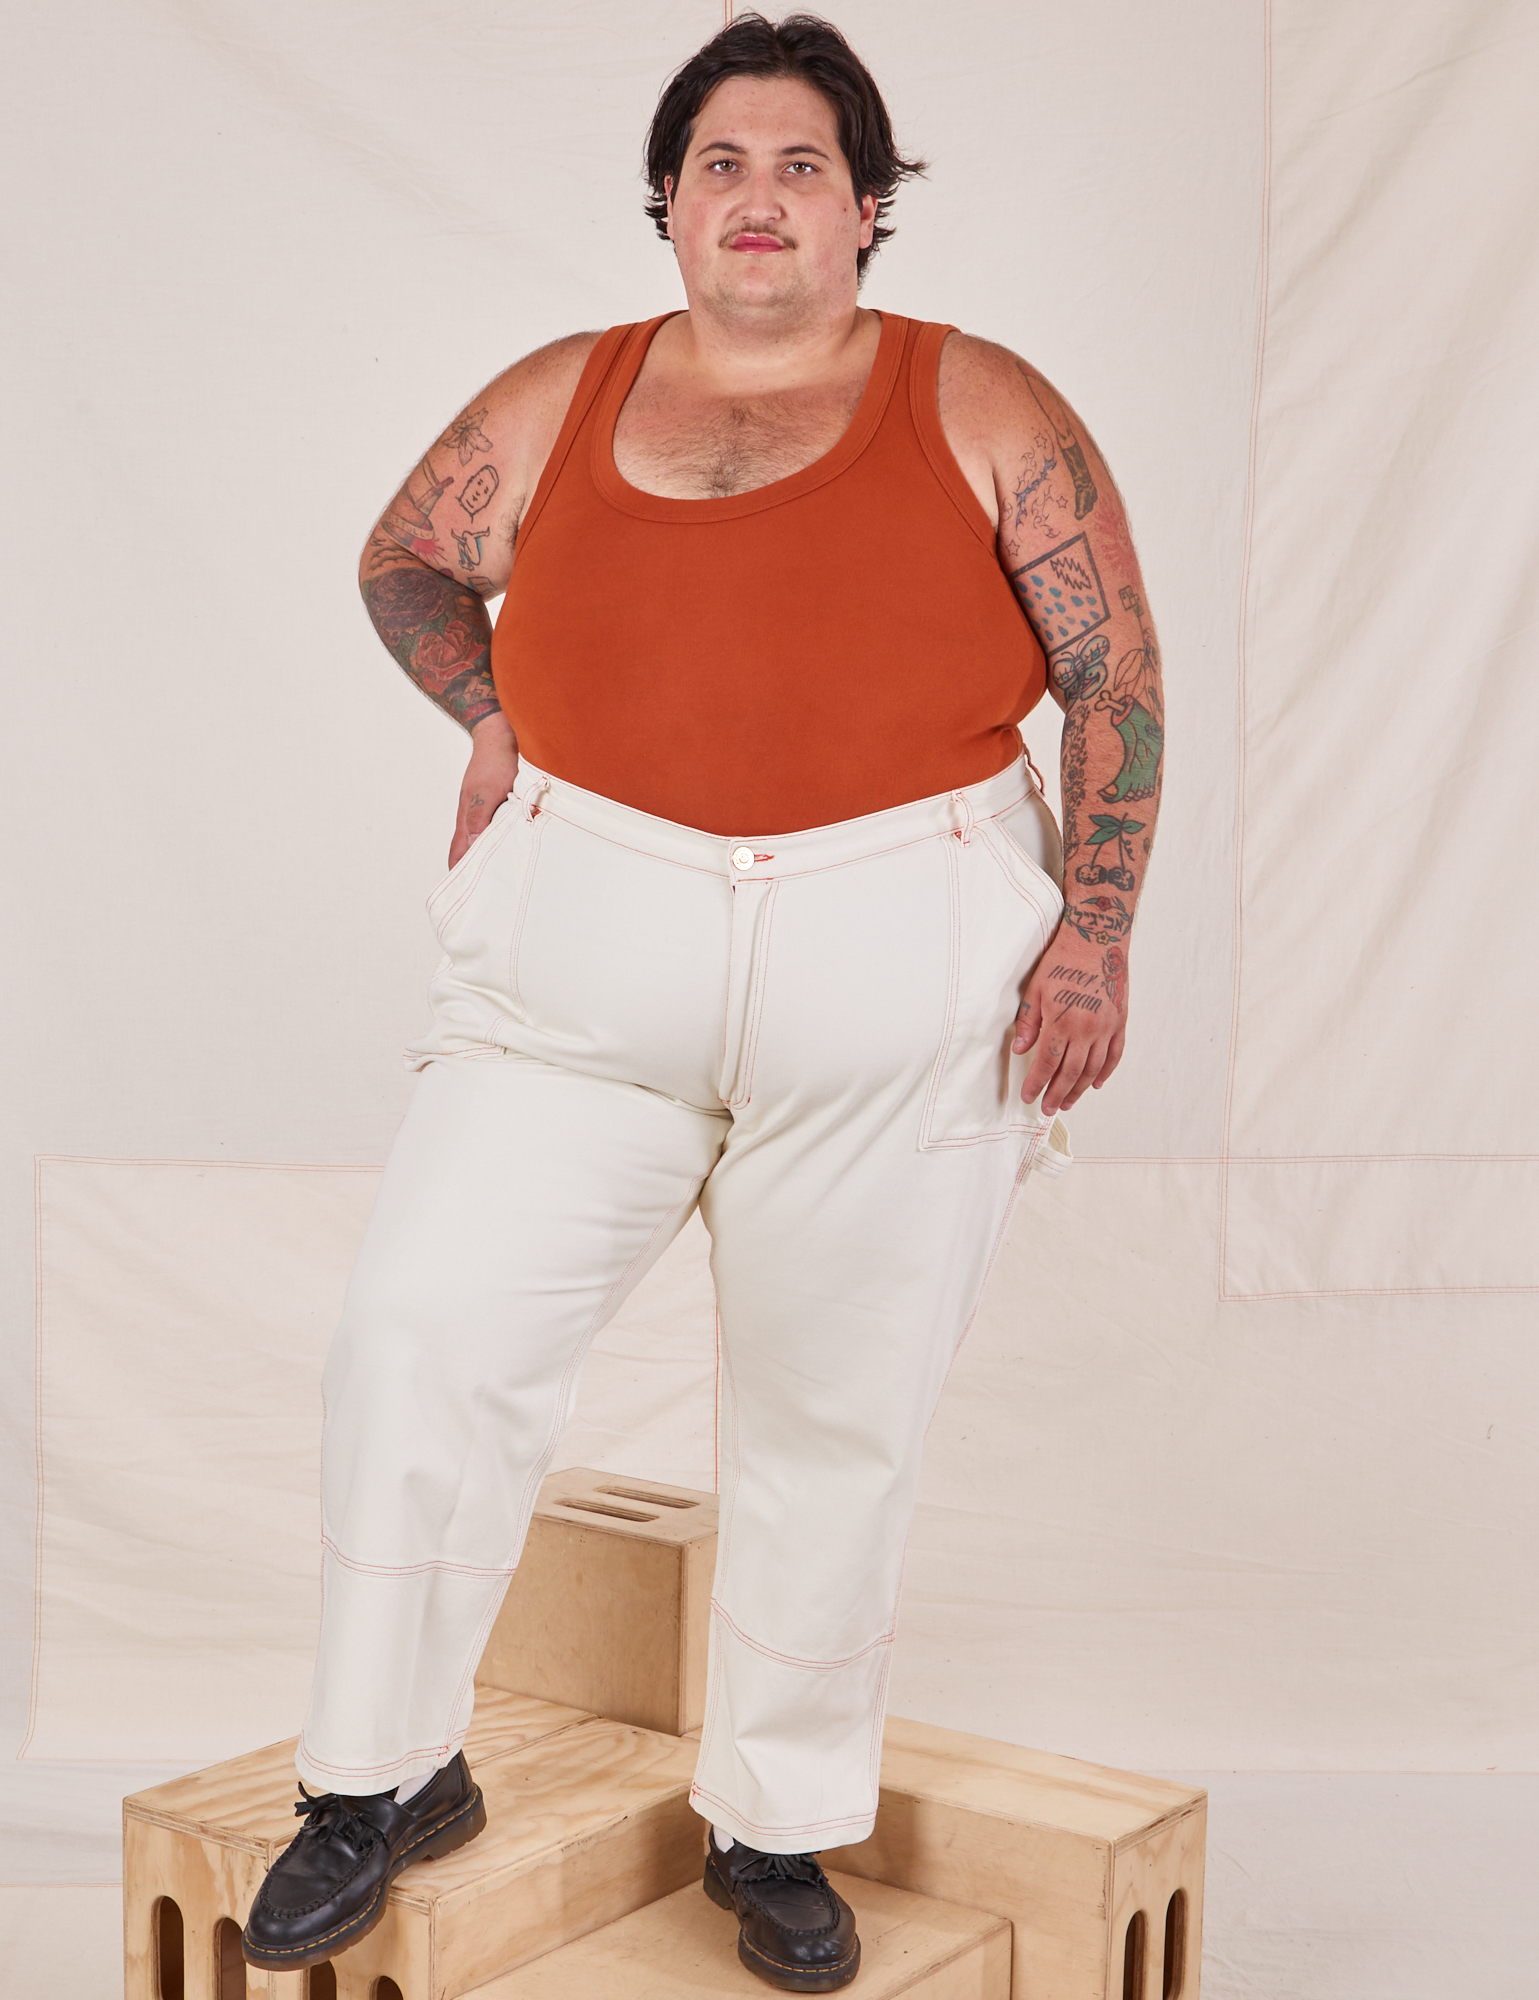 Sam is 5&#39;10&quot; and wearing 3XL Carpenter Jeans in Vintage Off-White paired with burnt terracotta Cropped Tank Top